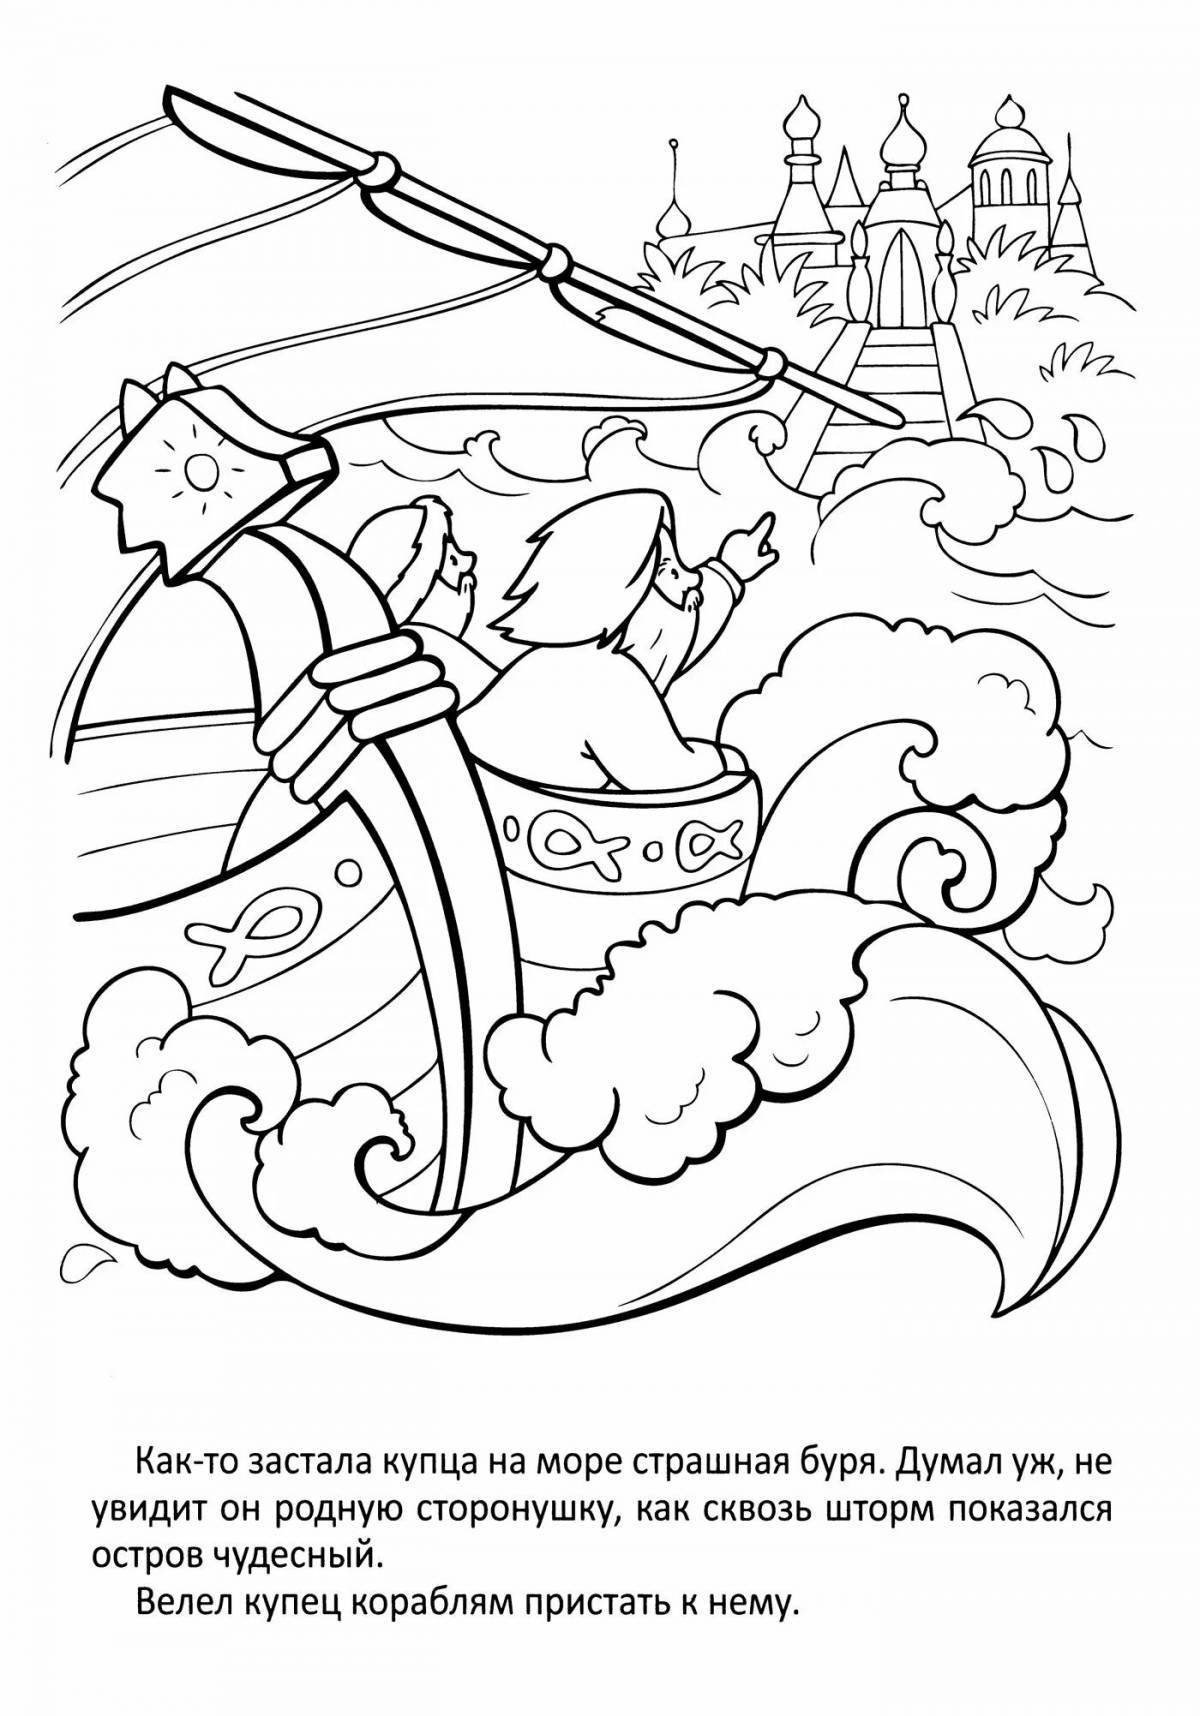 Inviting coloring book for the tale of Tsar Saltan Grade 3